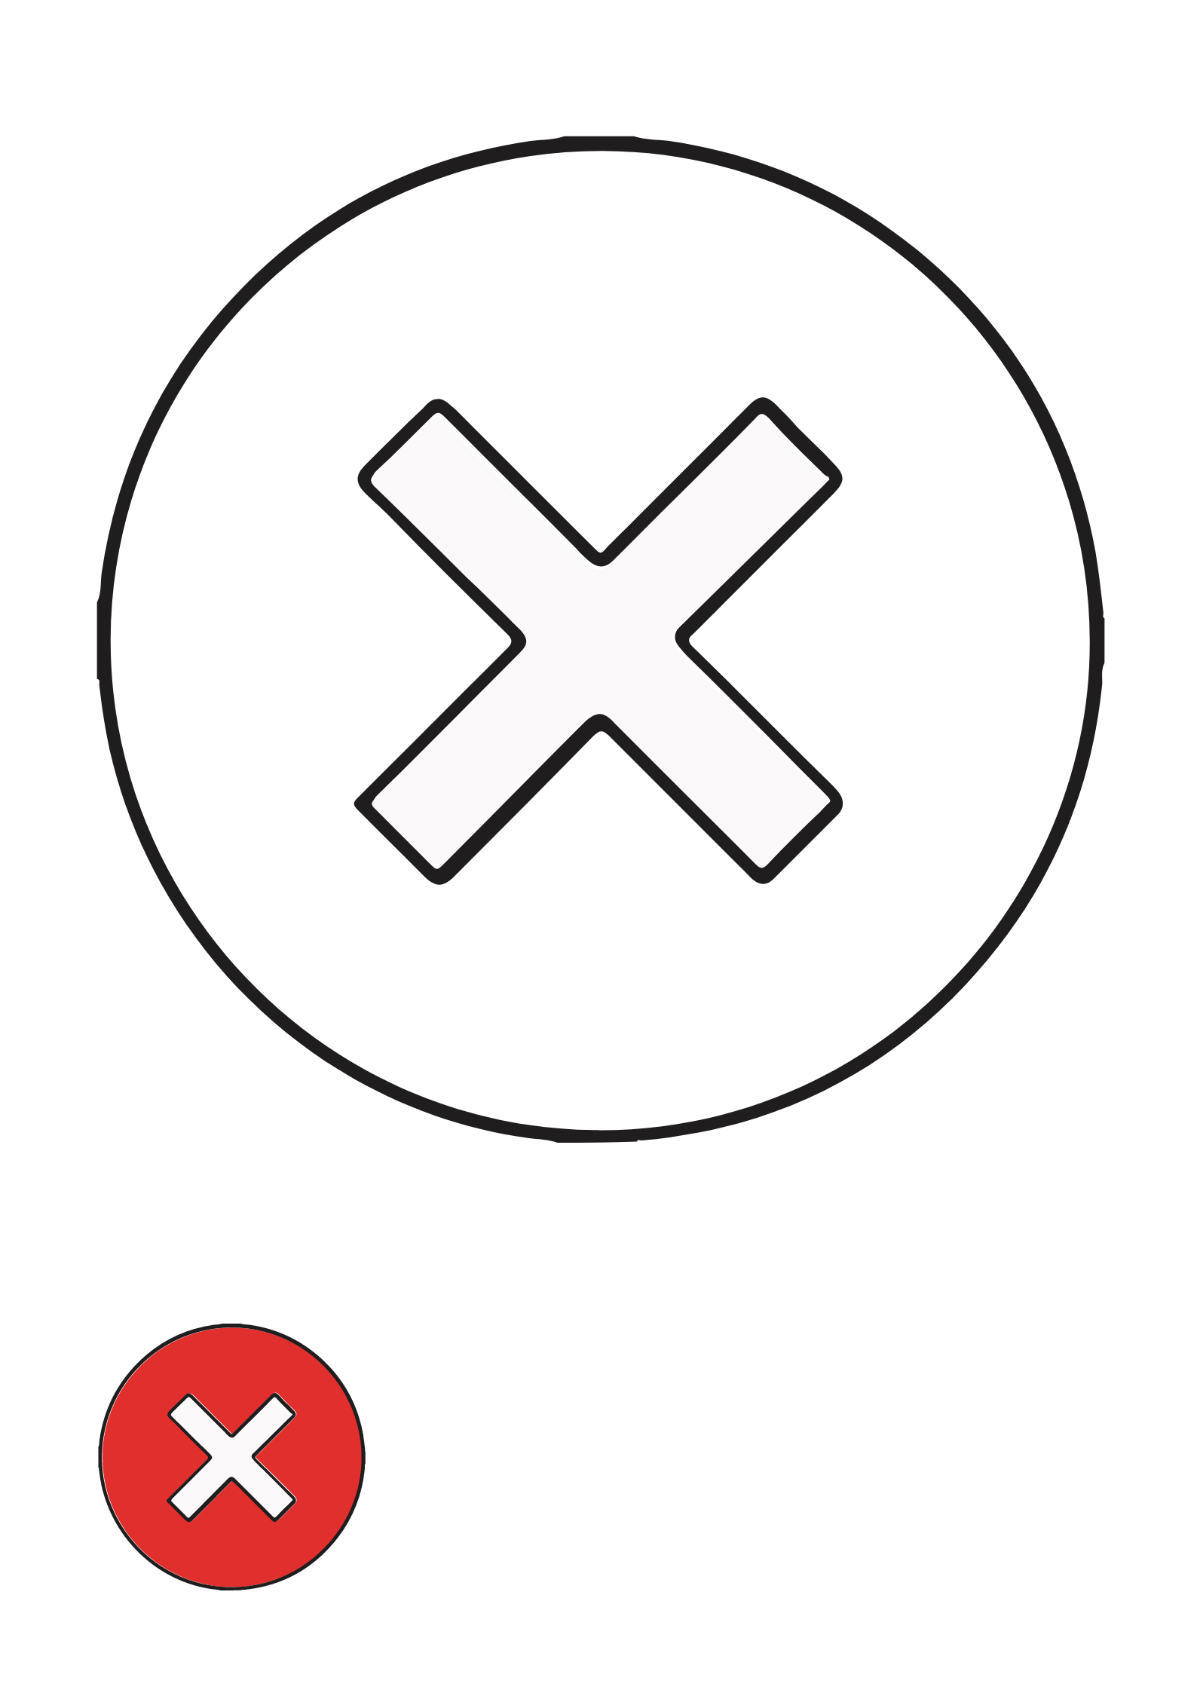 Red Cross Check Mark Coloring Page Template